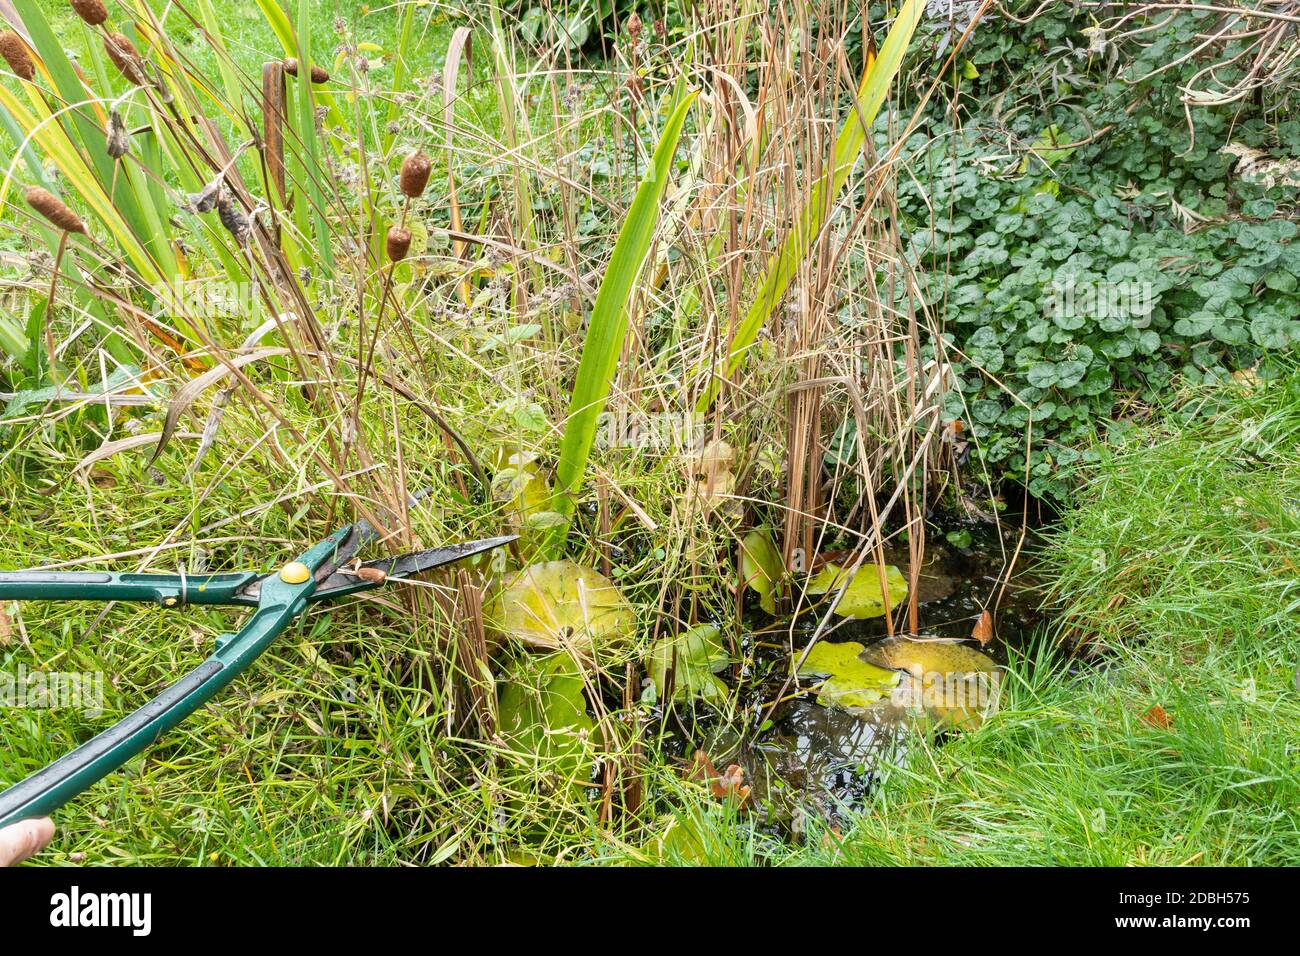 Maintaining a garden wildlife pond in autumn 1, UK. Trimming overgrown pondside plants with shears. Stock Photo